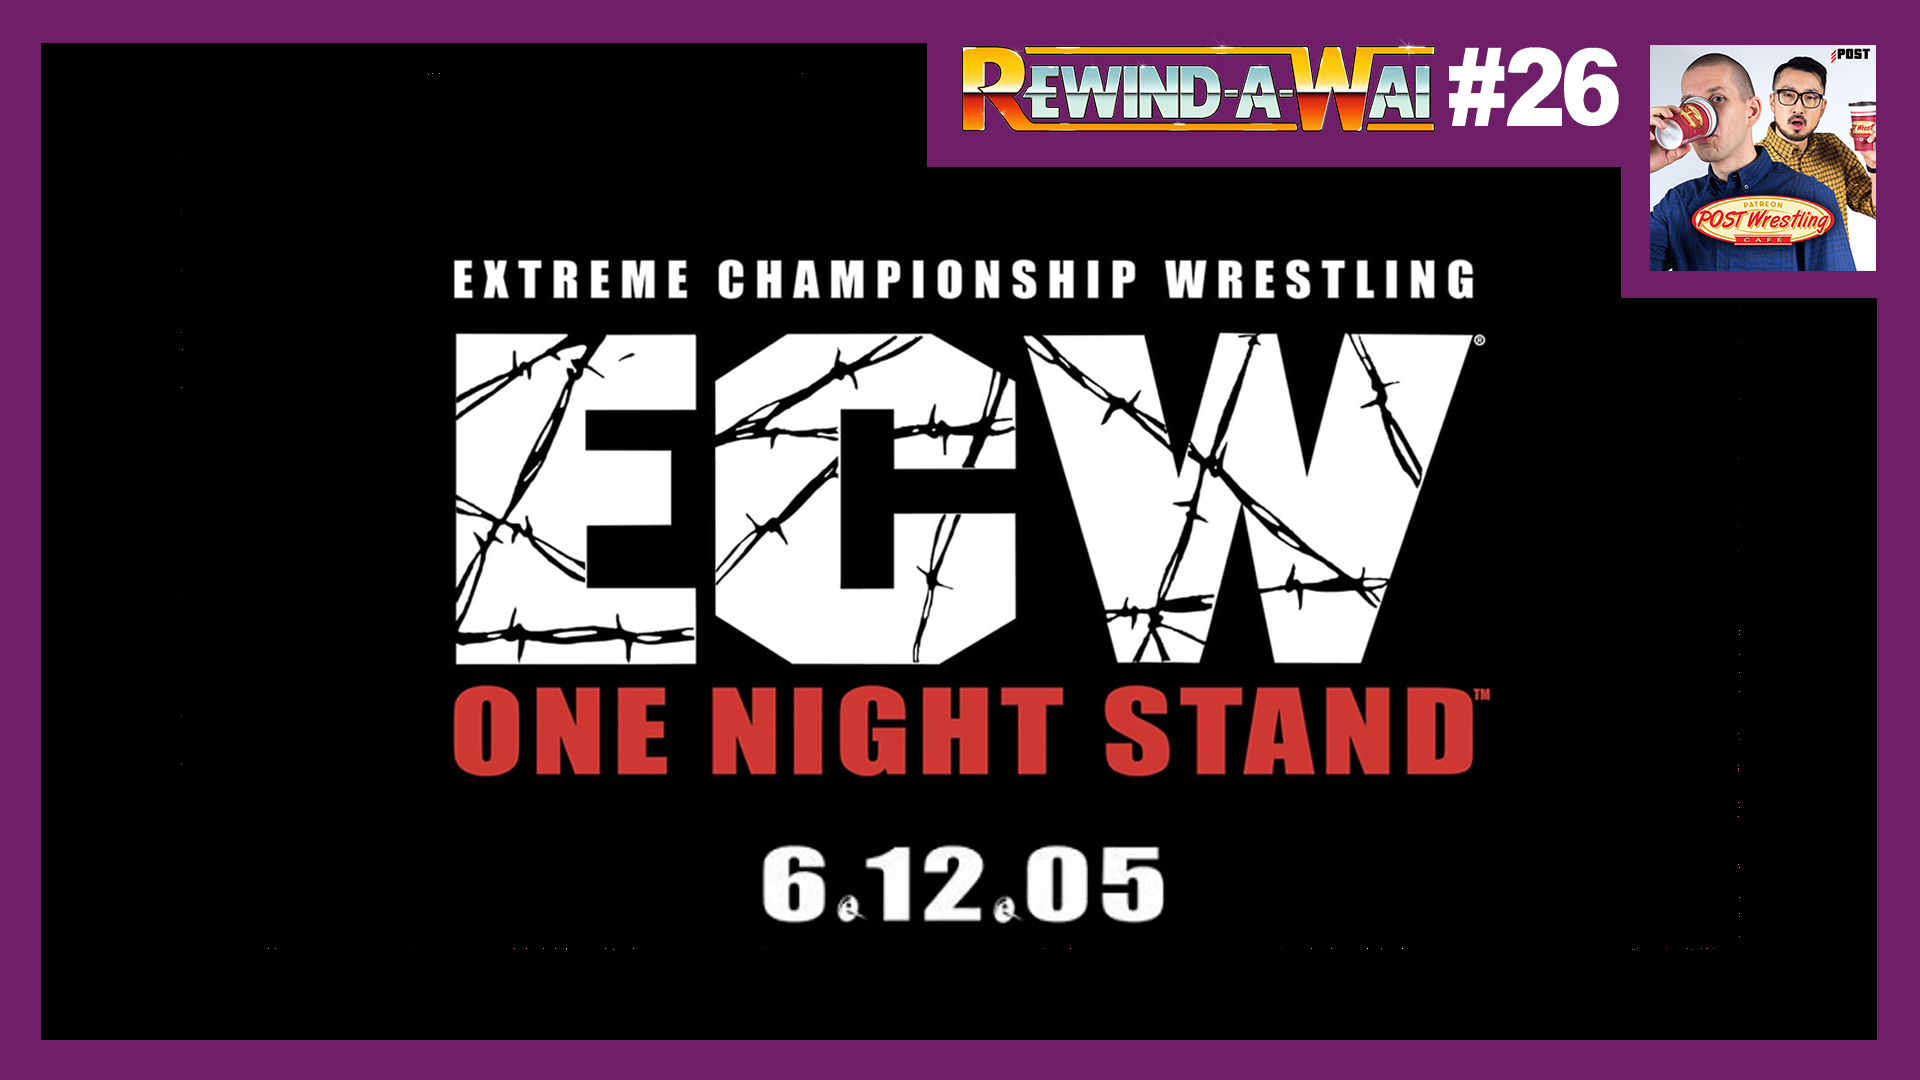 Rewind A Wai 26 Ecw One Night Stand 2005 Post Wrestling Wwe Nxt Aew Njpw Ufc Podcasts News Reviews Sandman 1st wwe dubbed theme (clear, full and rare). rewind a wai 26 ecw one night stand